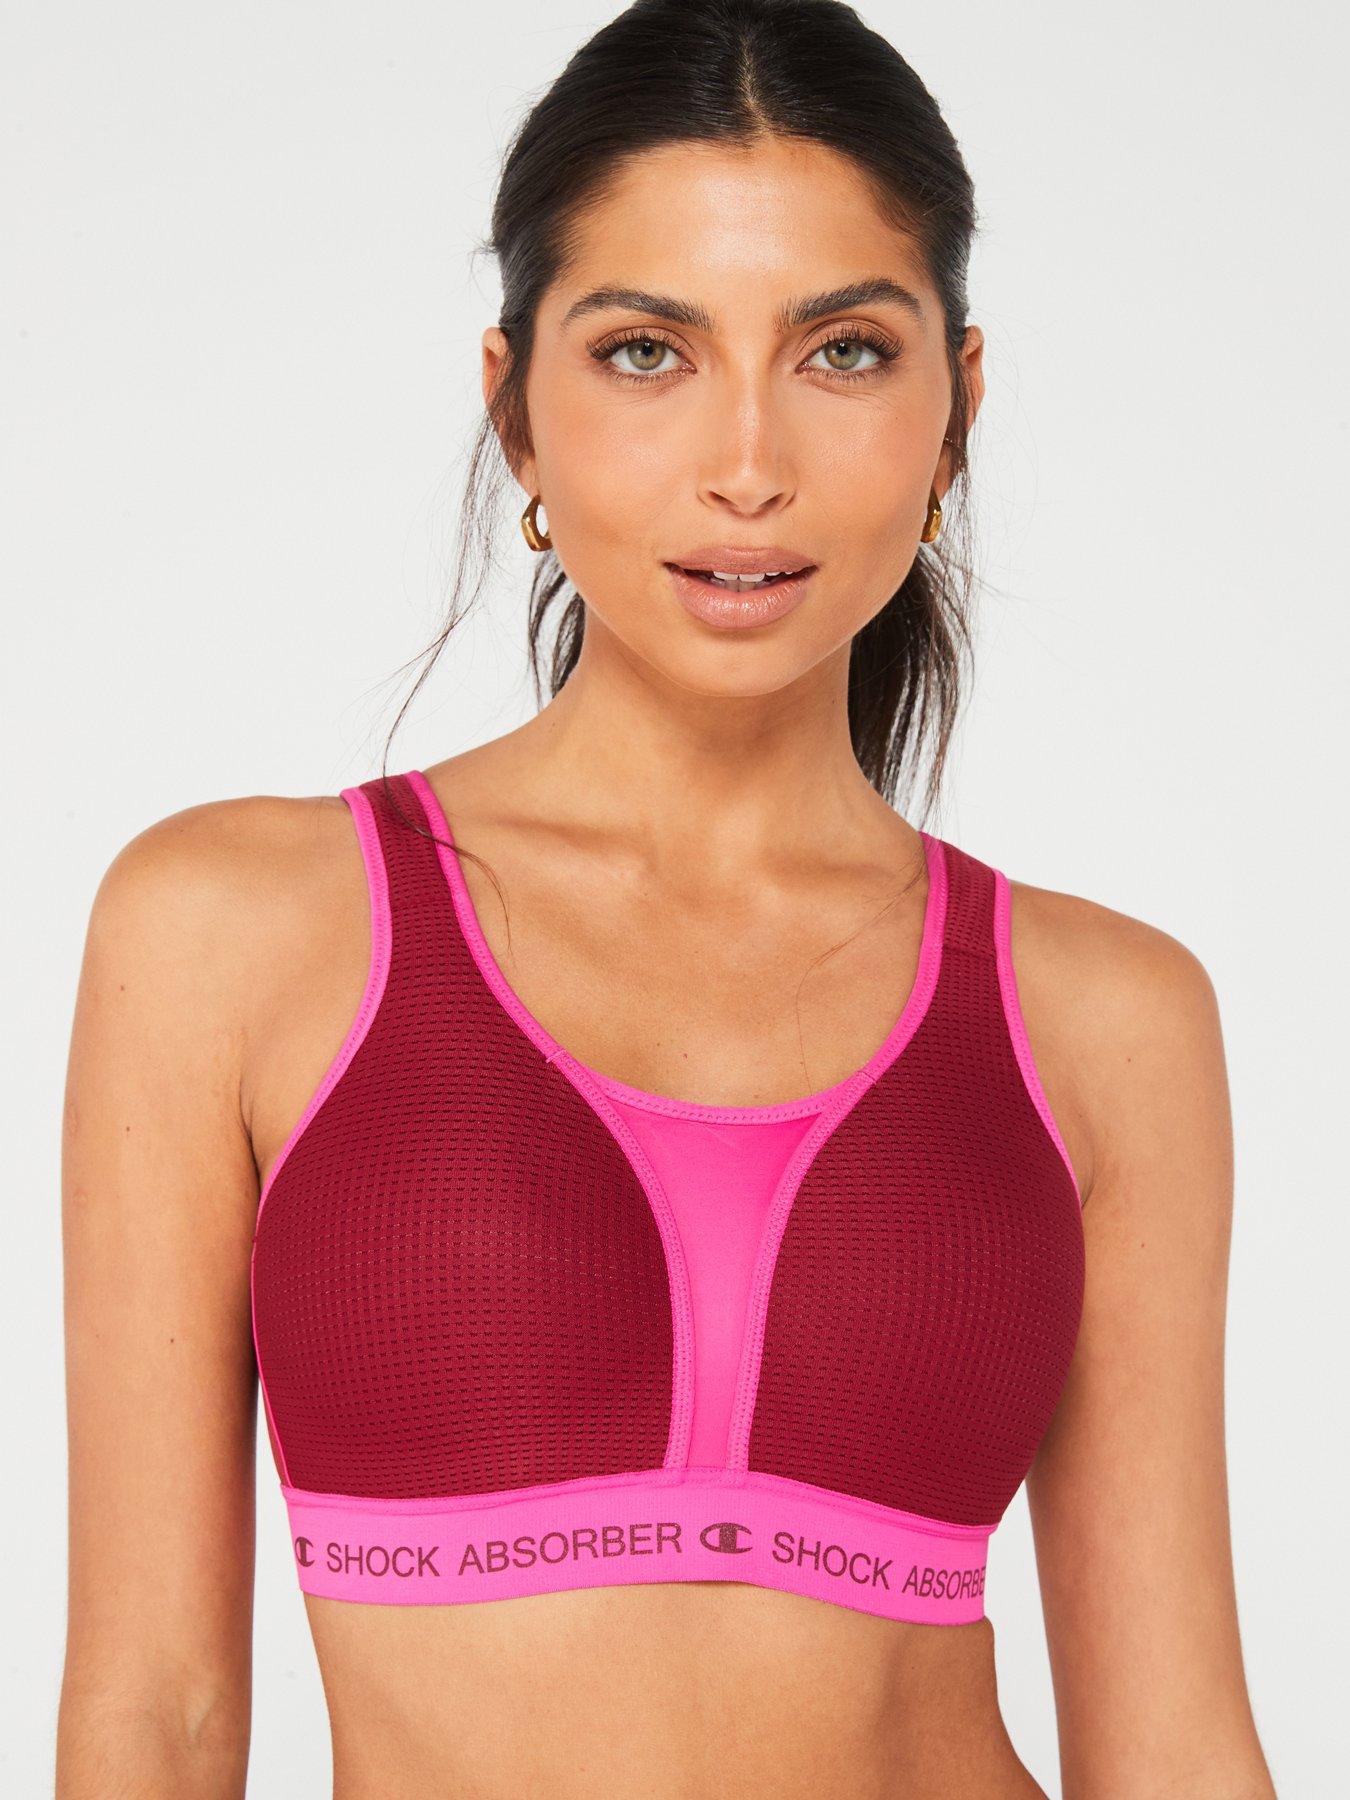 Shock Absorber Ultimate run sports bra in pink with yellow detail